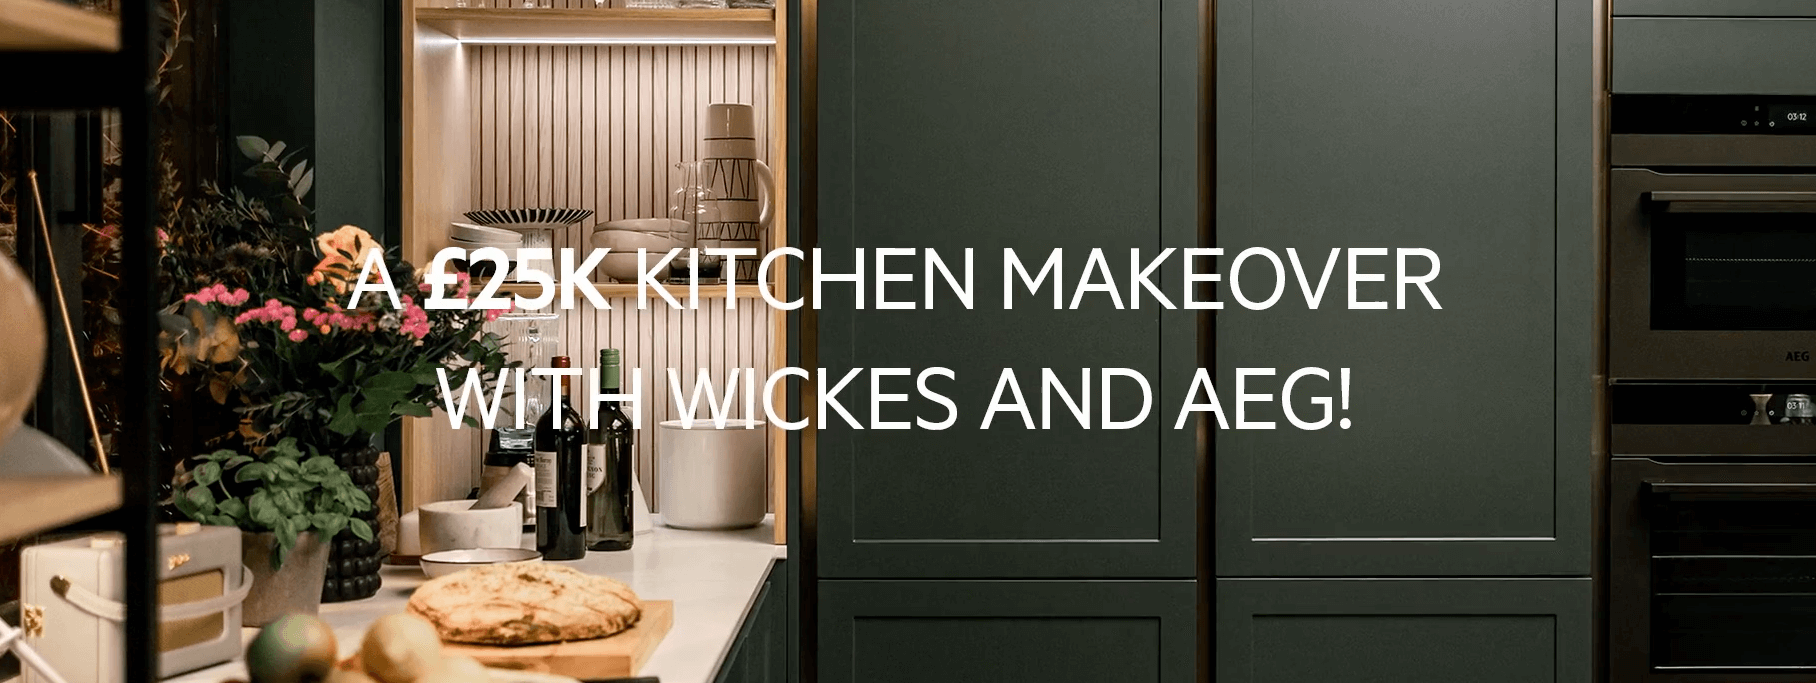 AEG Competition: Win a £25k Kitchen Makeover with Wickes